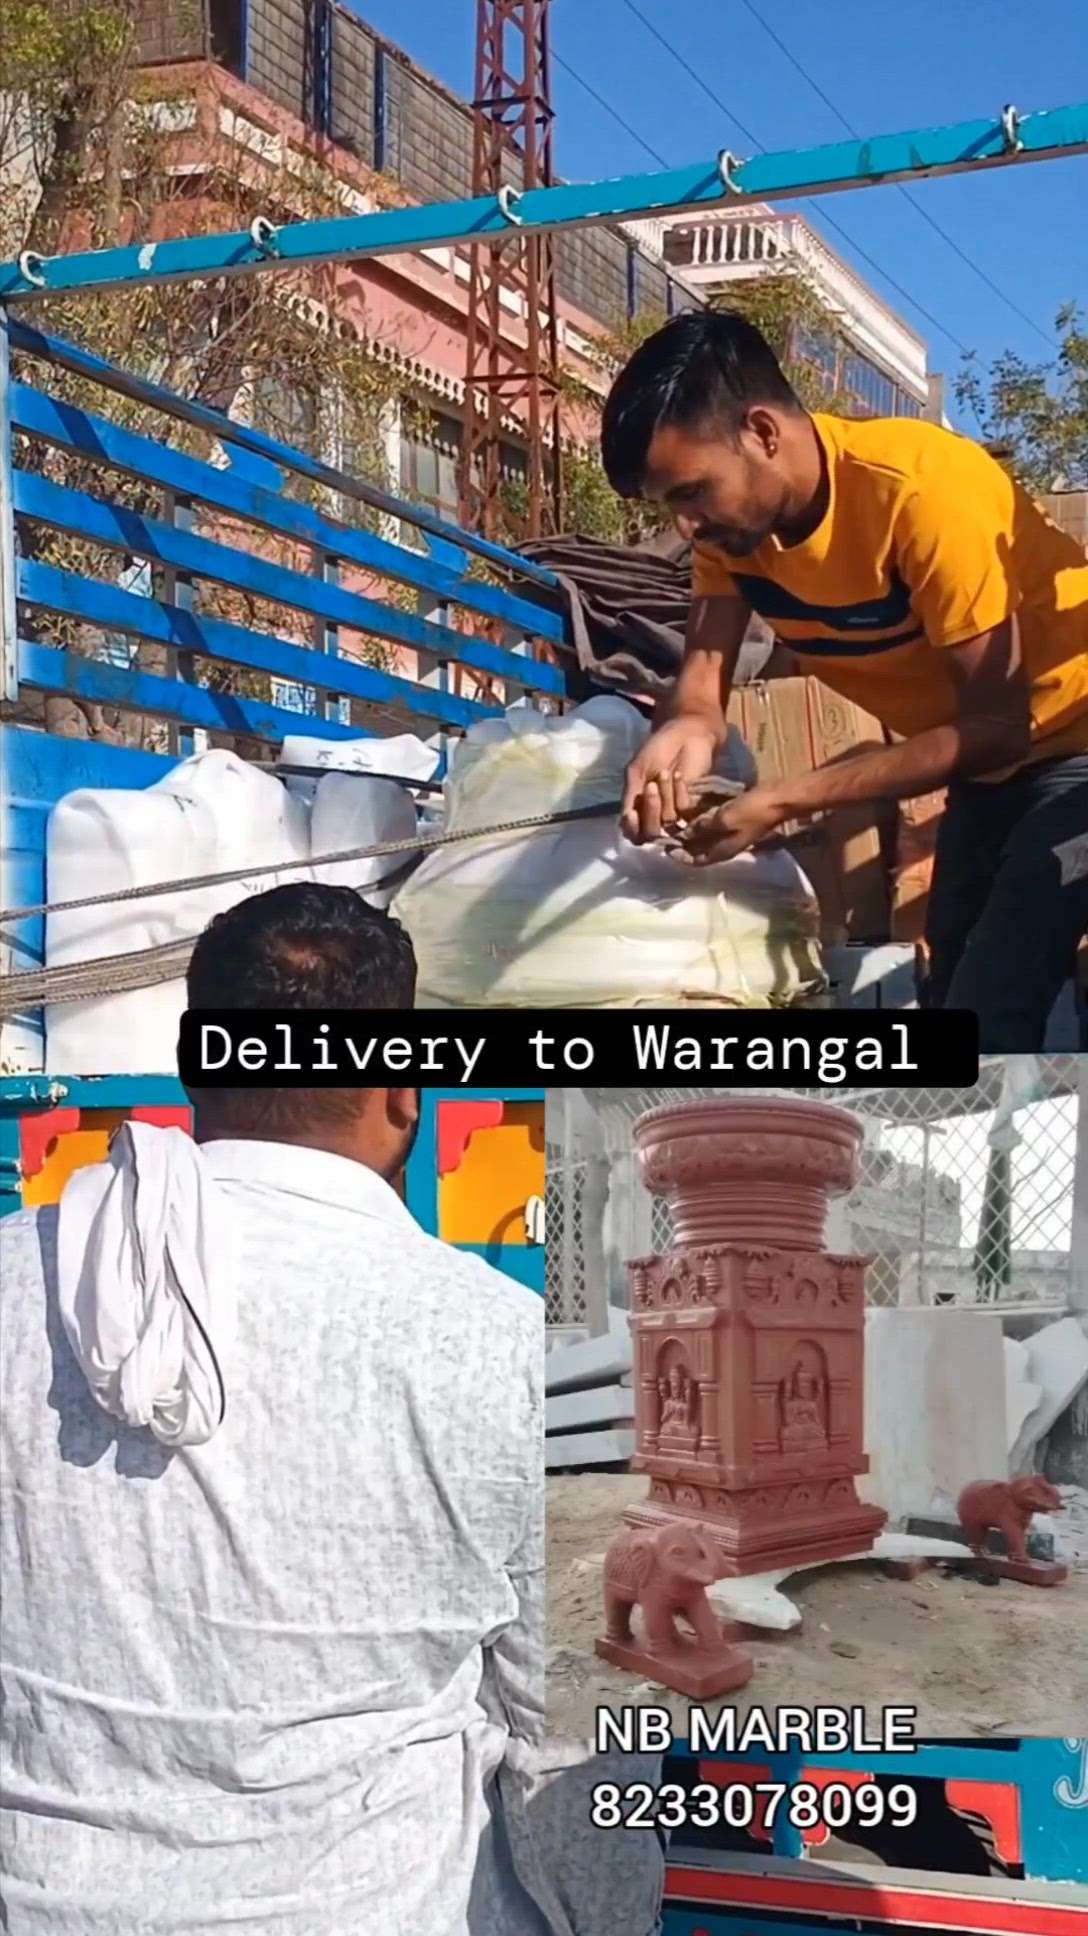 Delivery to Warangal

Red Sandstone Tulsi Pot 

We are manufacturer of marble and sandstone Tulsi Pot

We make any design according to your requirement and size

Follow me @nbmarble

More information contact me
8233078099

#warangal #warangaldiaries #nbmarble #hyderabad #tulsi #sandstone #marbletulsi #marblework #marbledesign #MarbleFountain